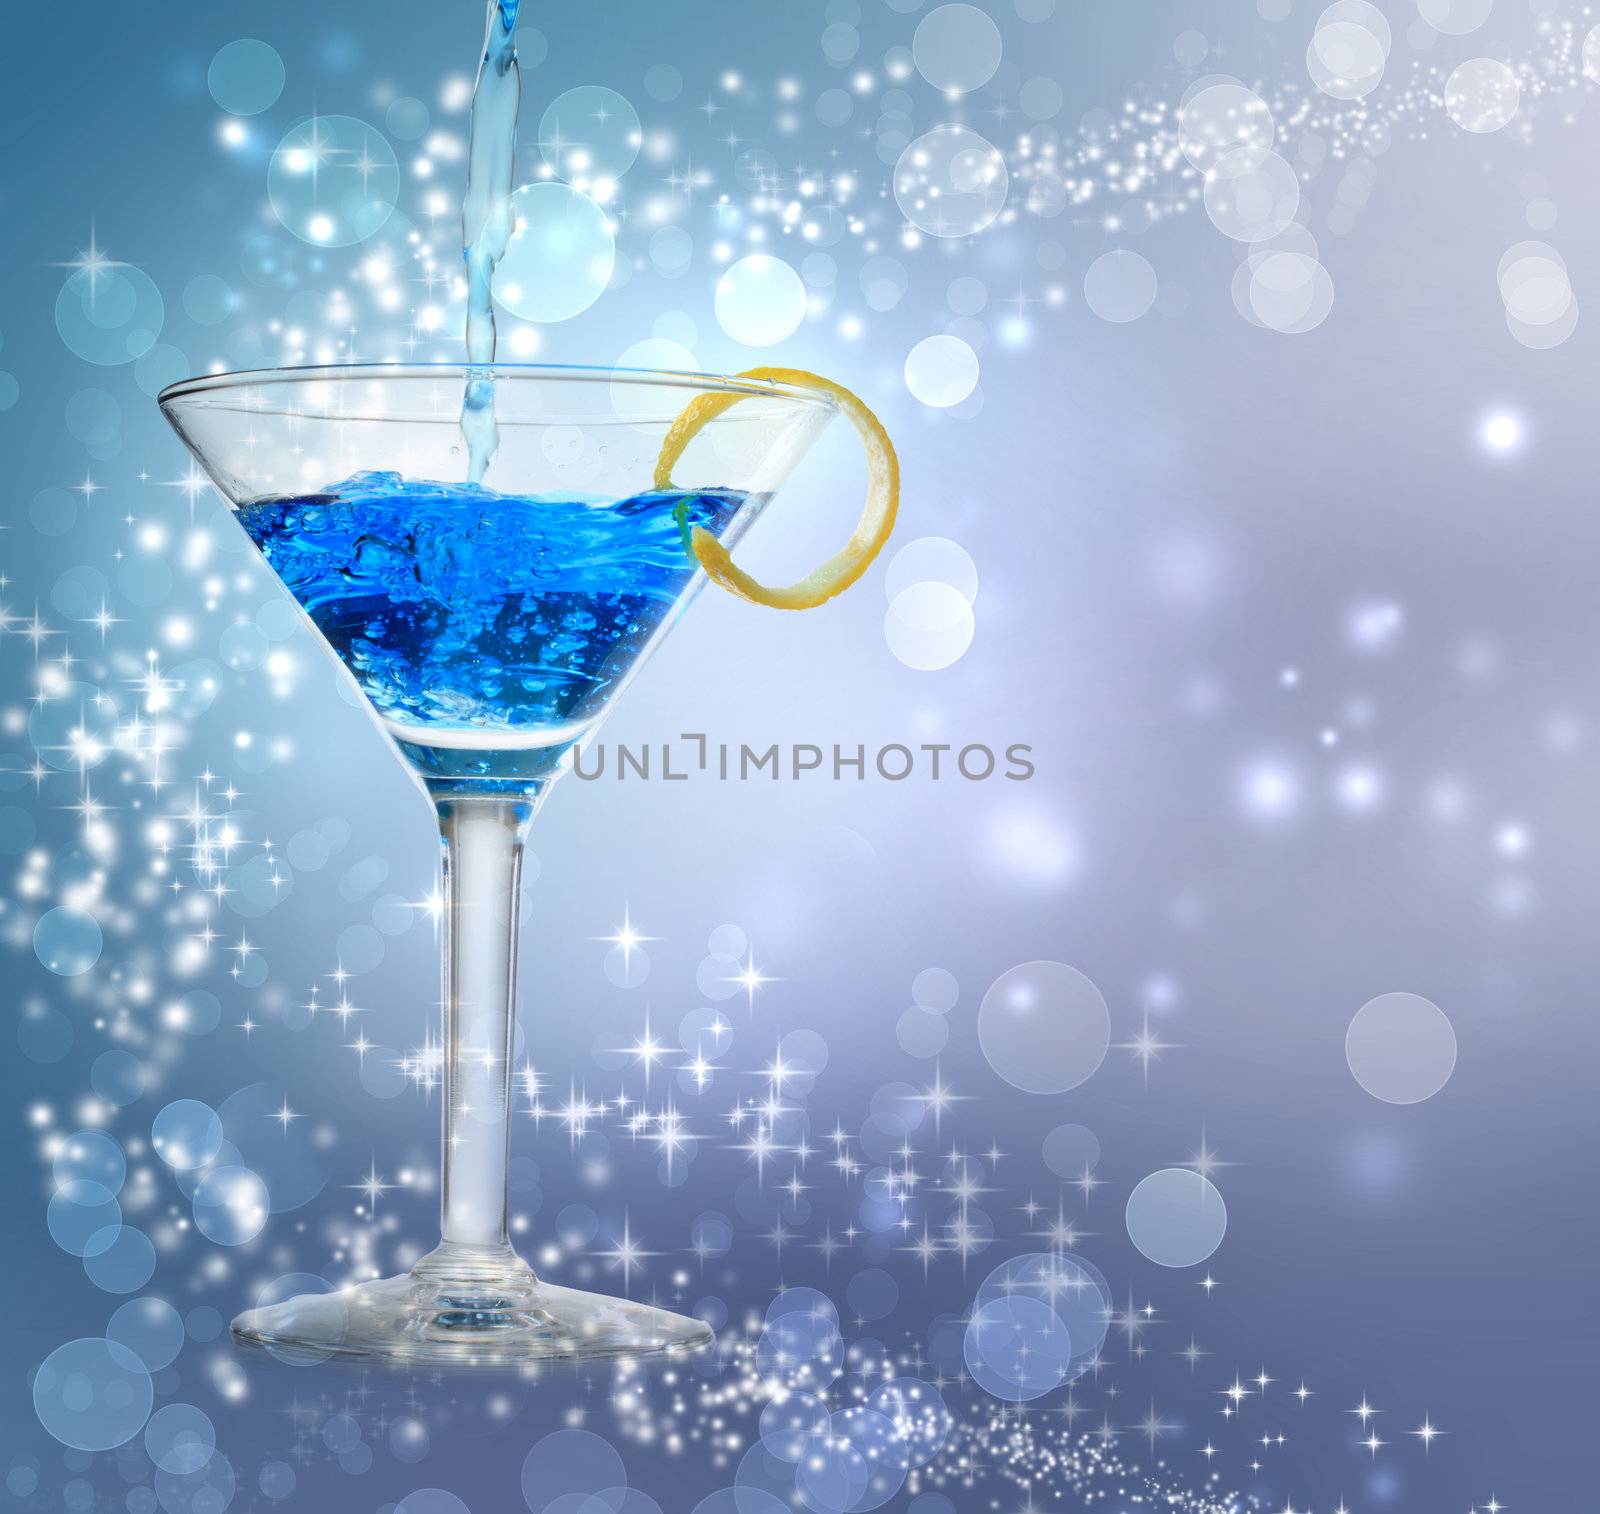  Blue cocktail being poured into a glass on abstract lights background